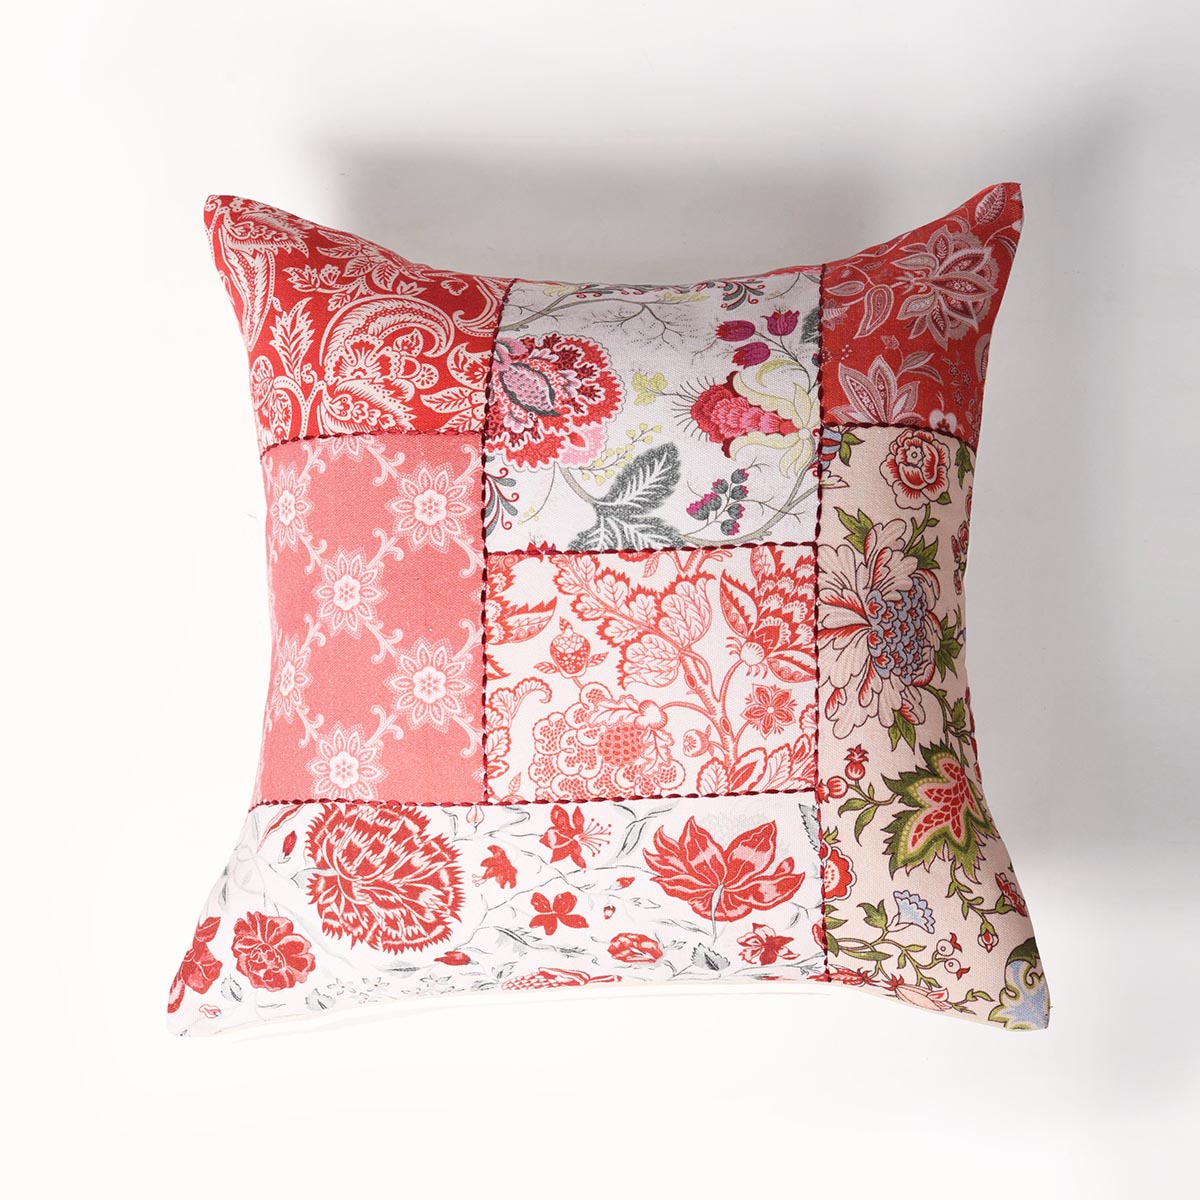 Patchwork print pillow cover, French vintage, decorative, cushion cover